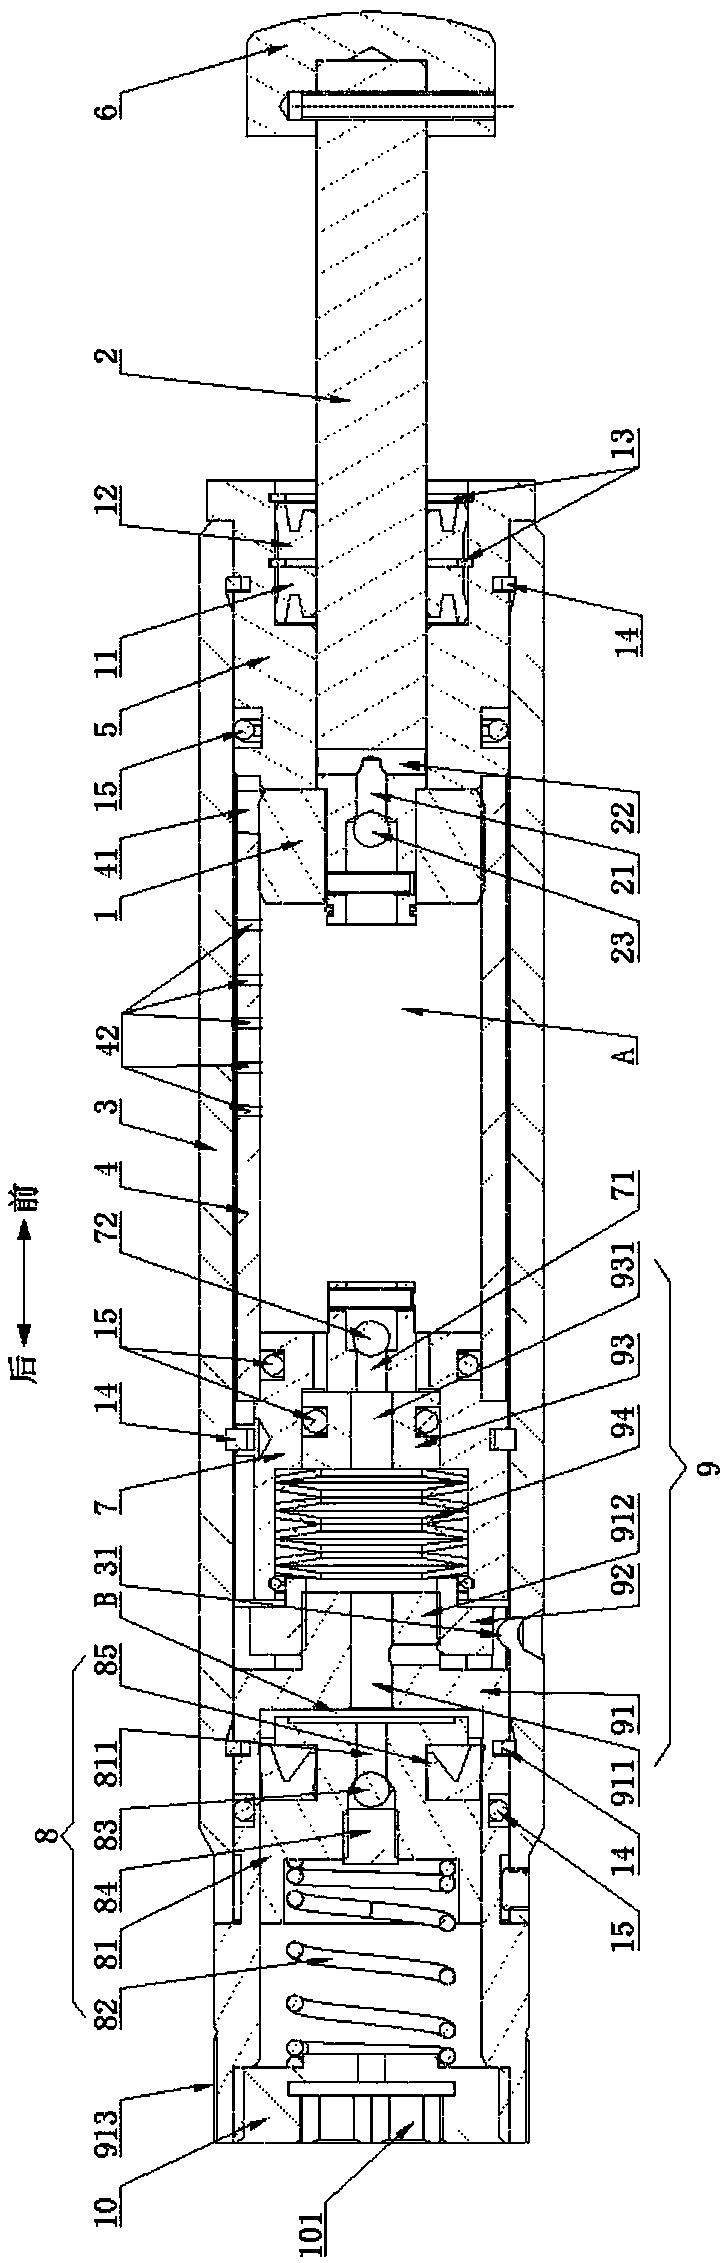 Adjustable oil pressure buffer with automatic compensation function